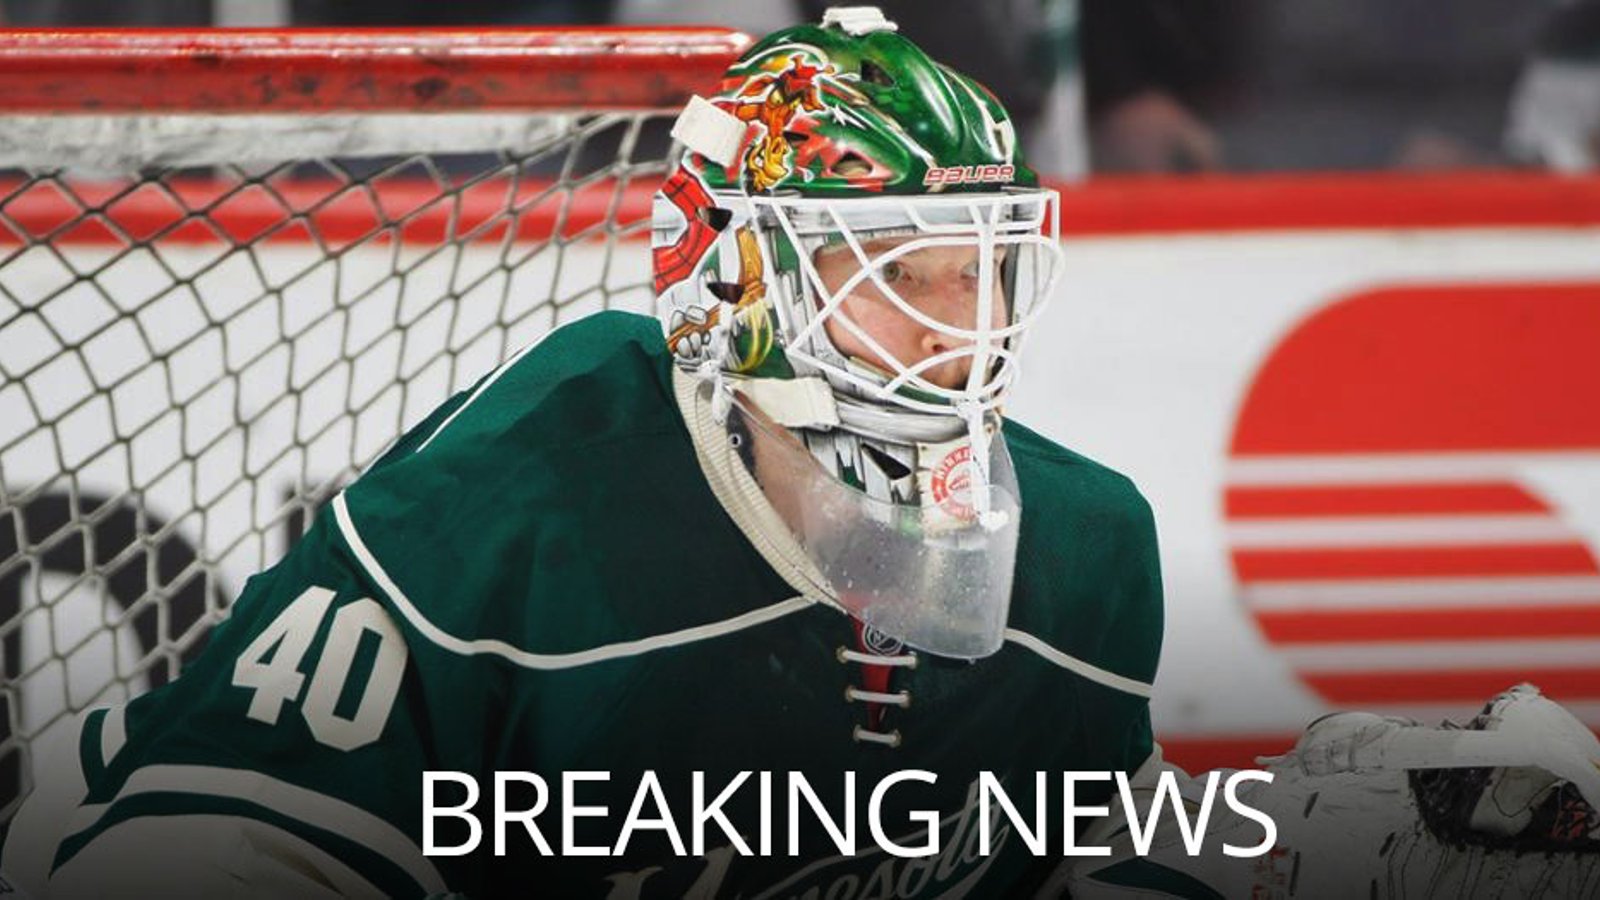 Breaking: Dubnyk set to return after long absence